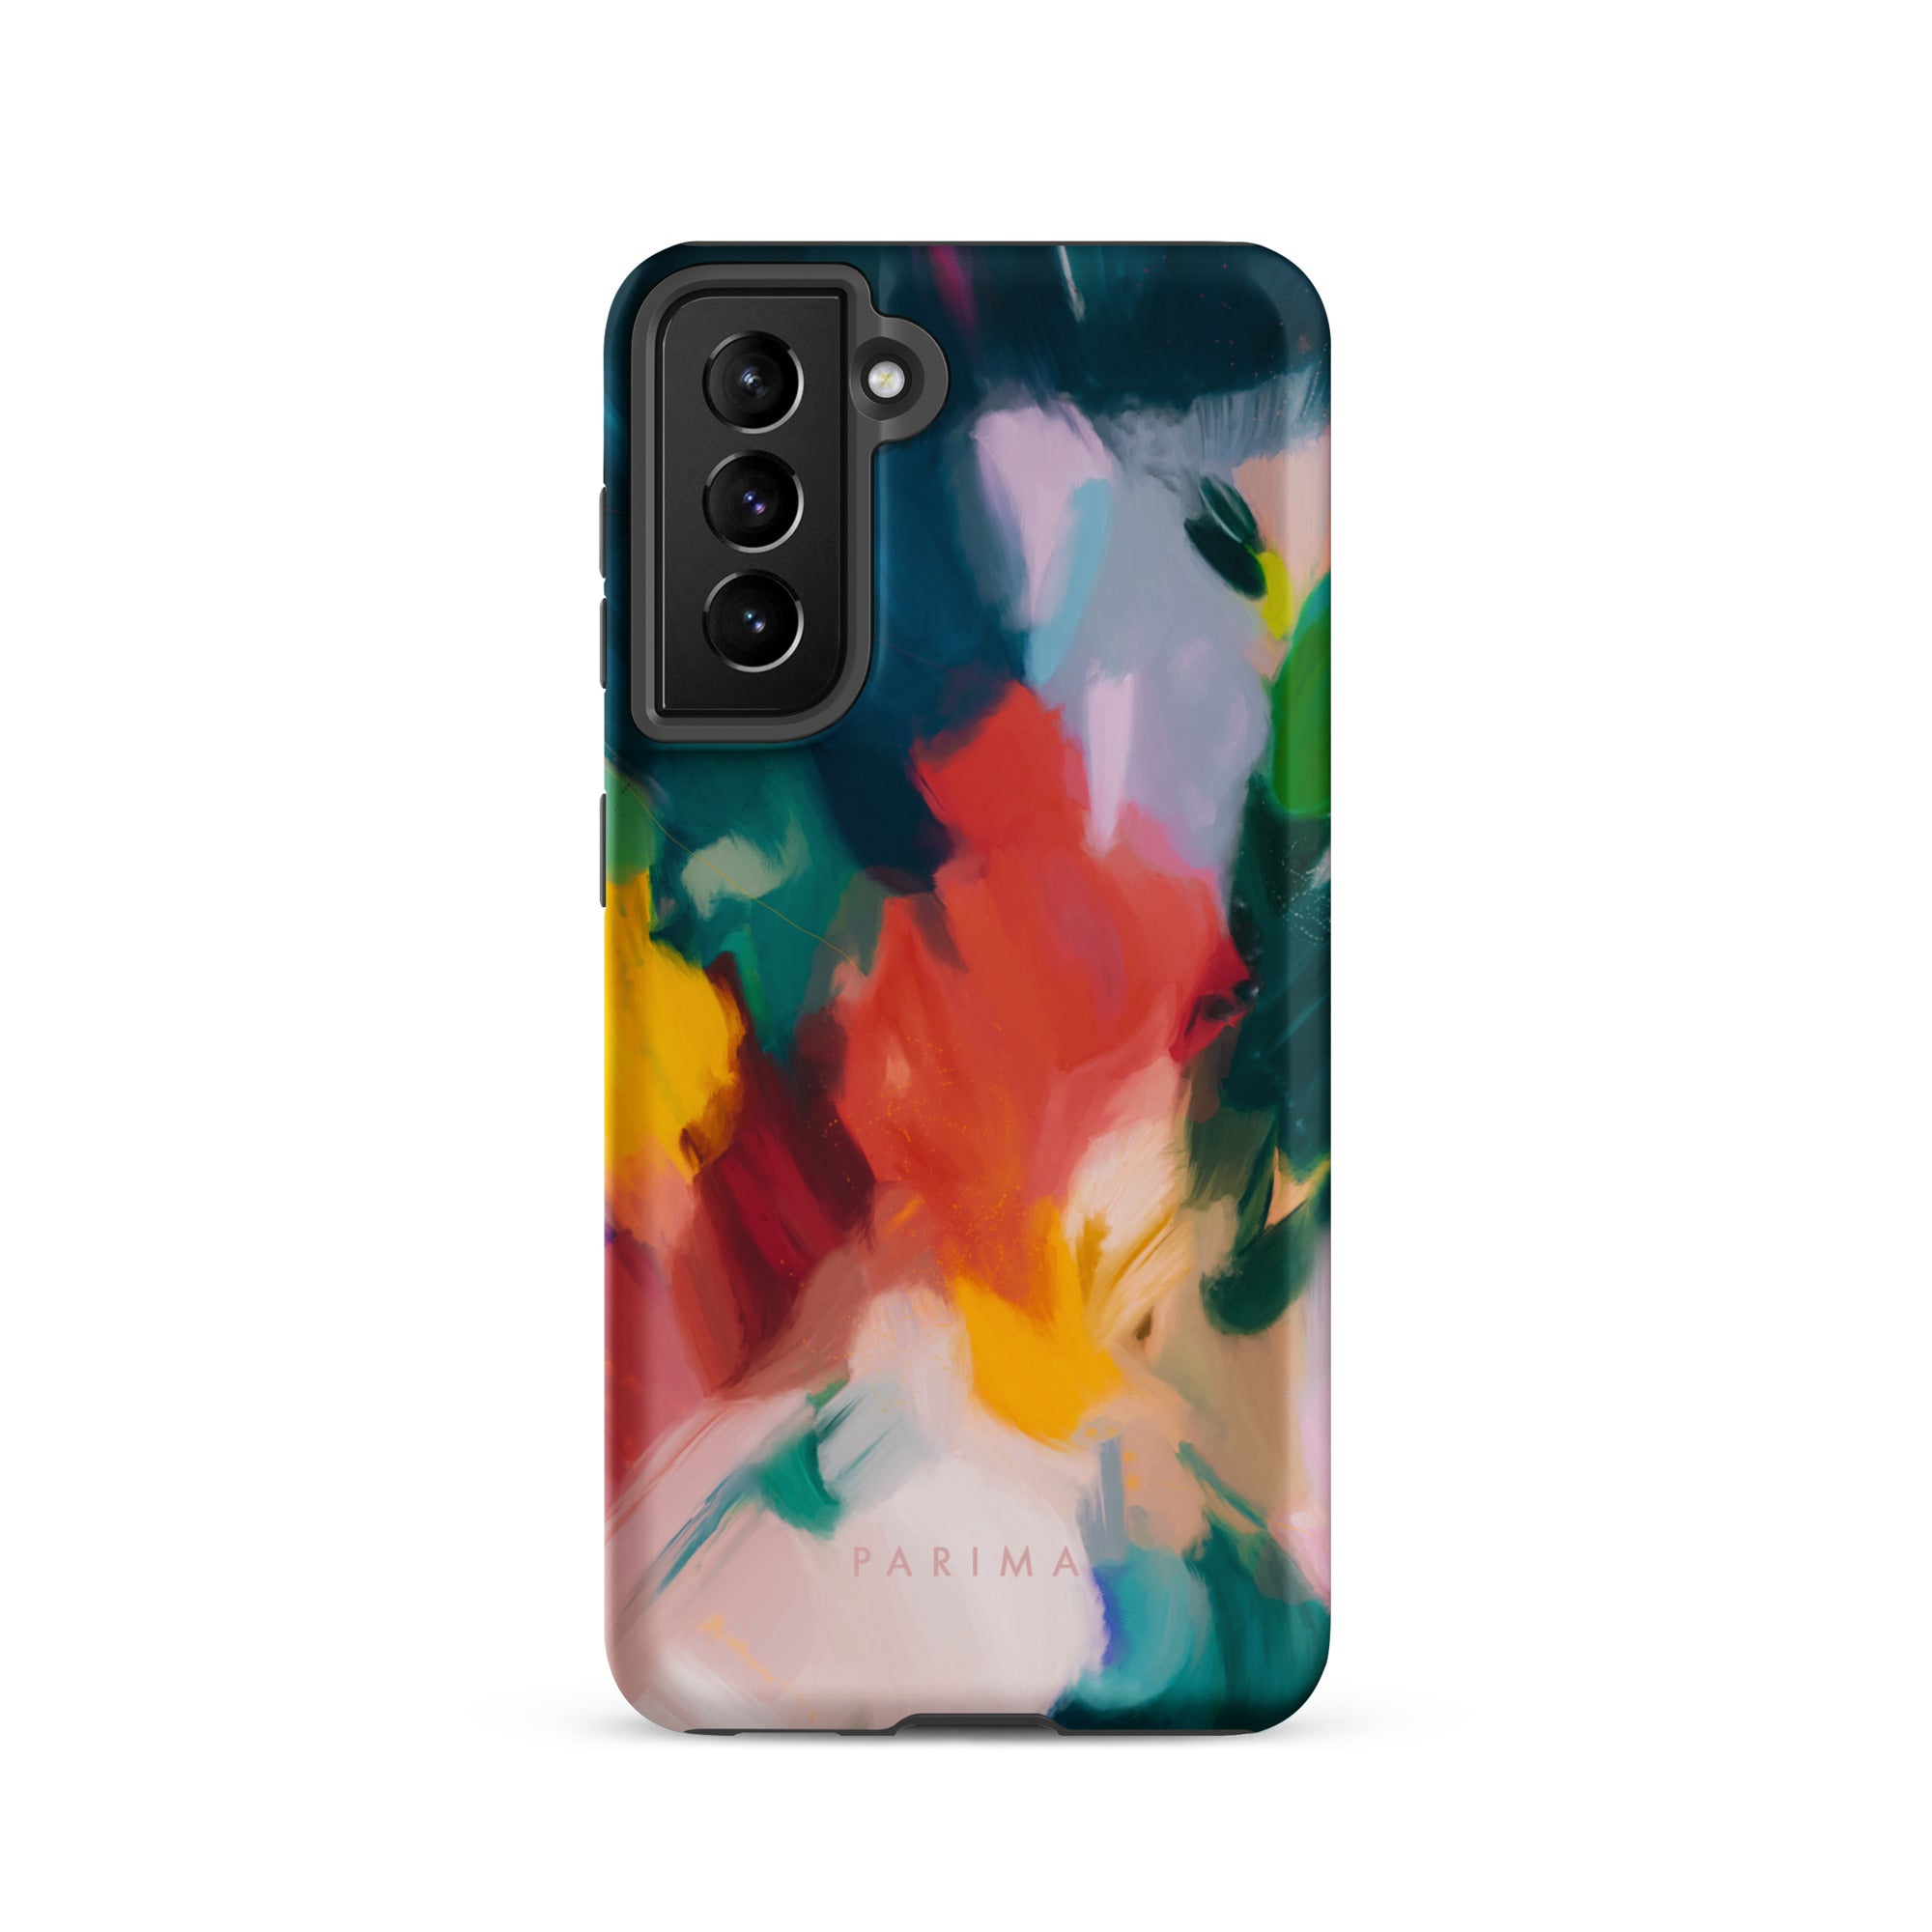 Pomme, blue and red abstract art on Samsung Galaxy S21 tough case by Parima Studio